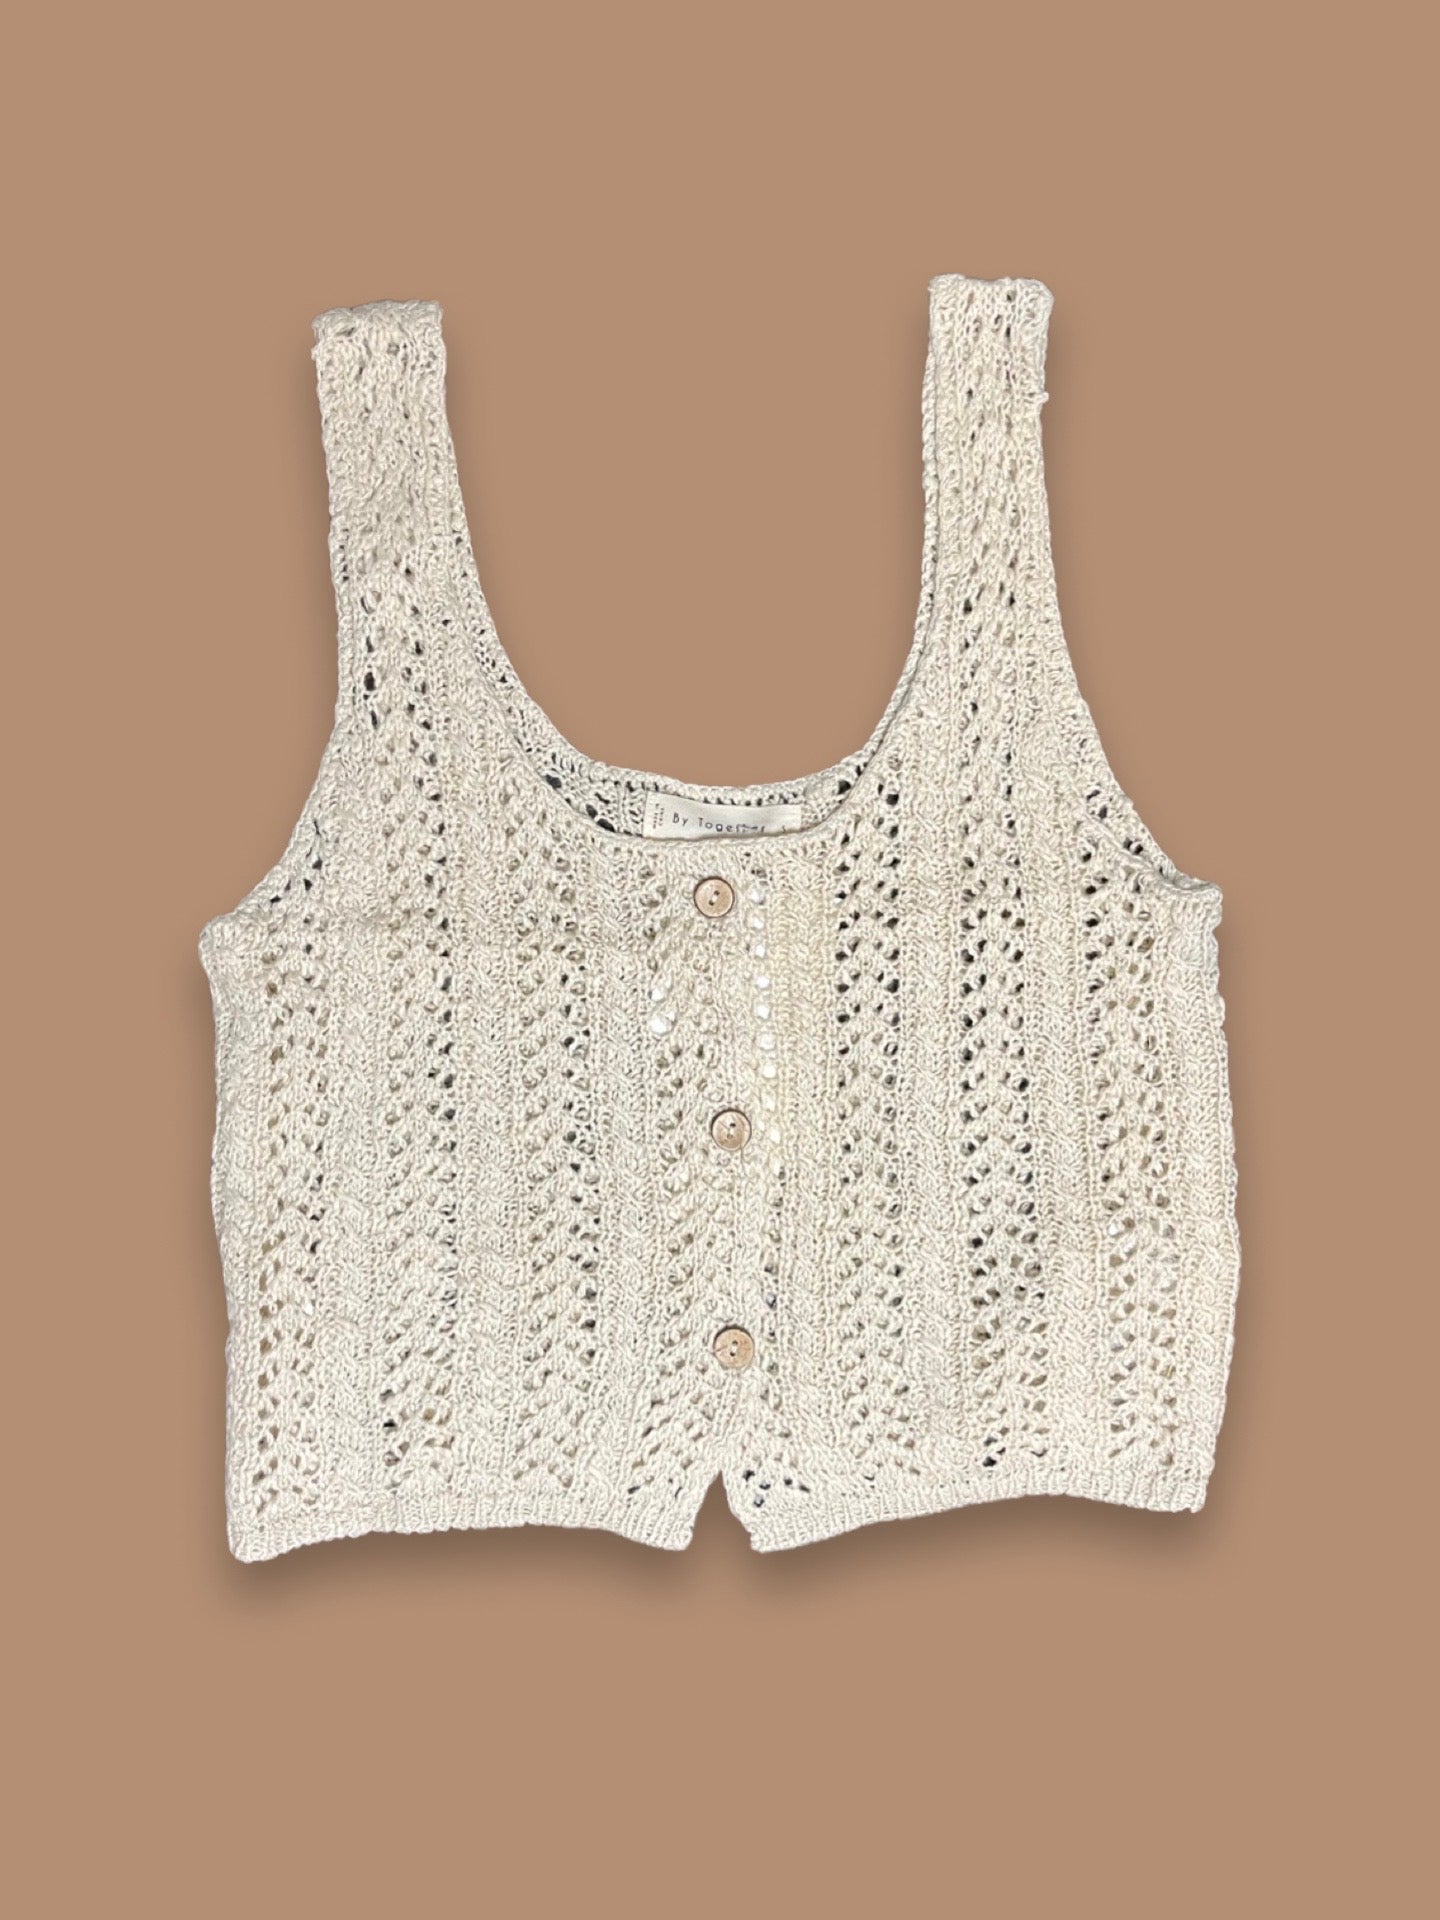 The Natural Cropped Vest